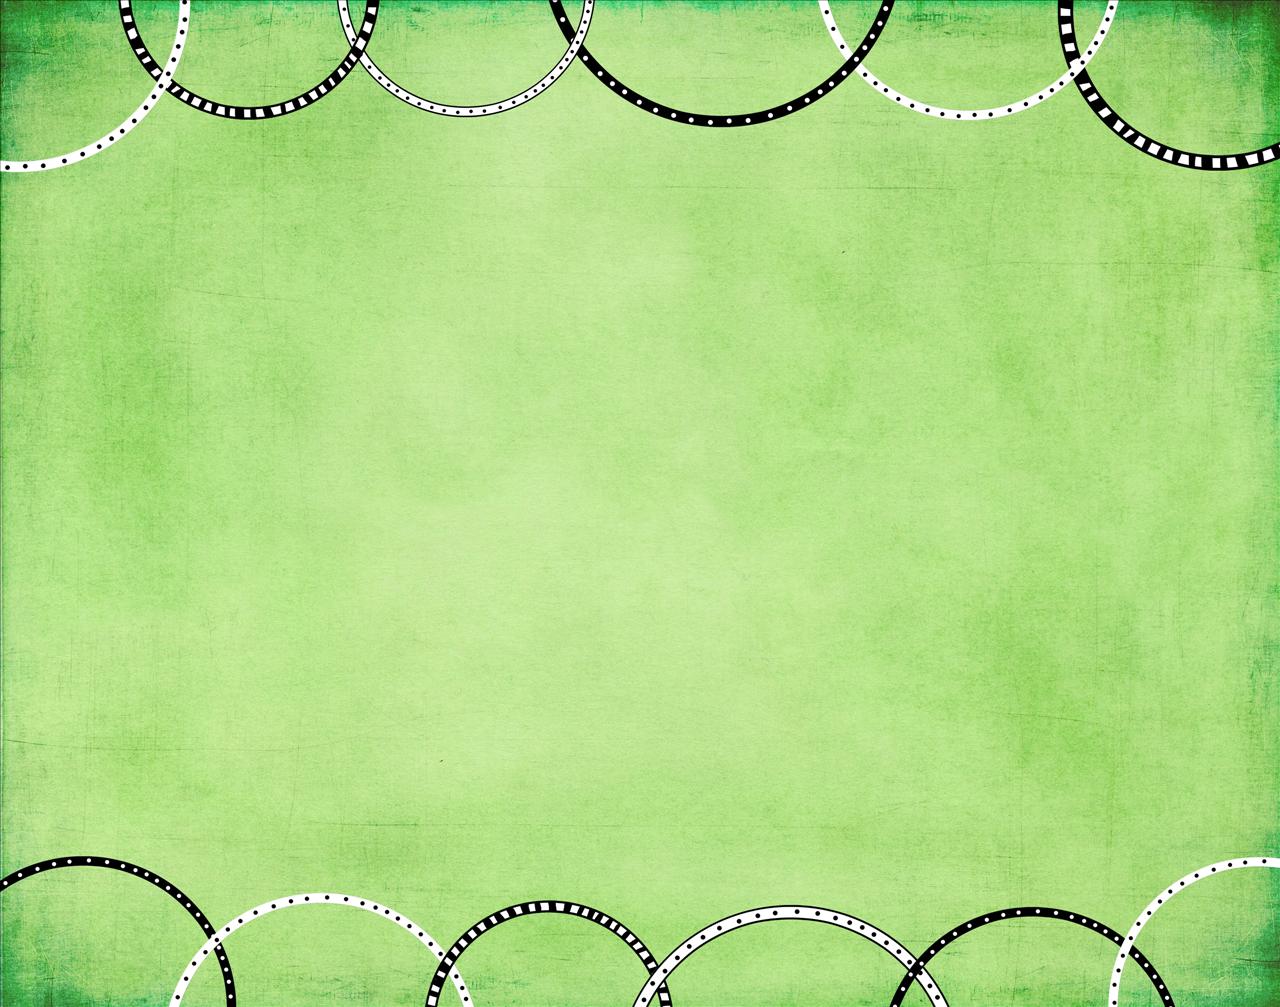 Green with Rings powerpoint background